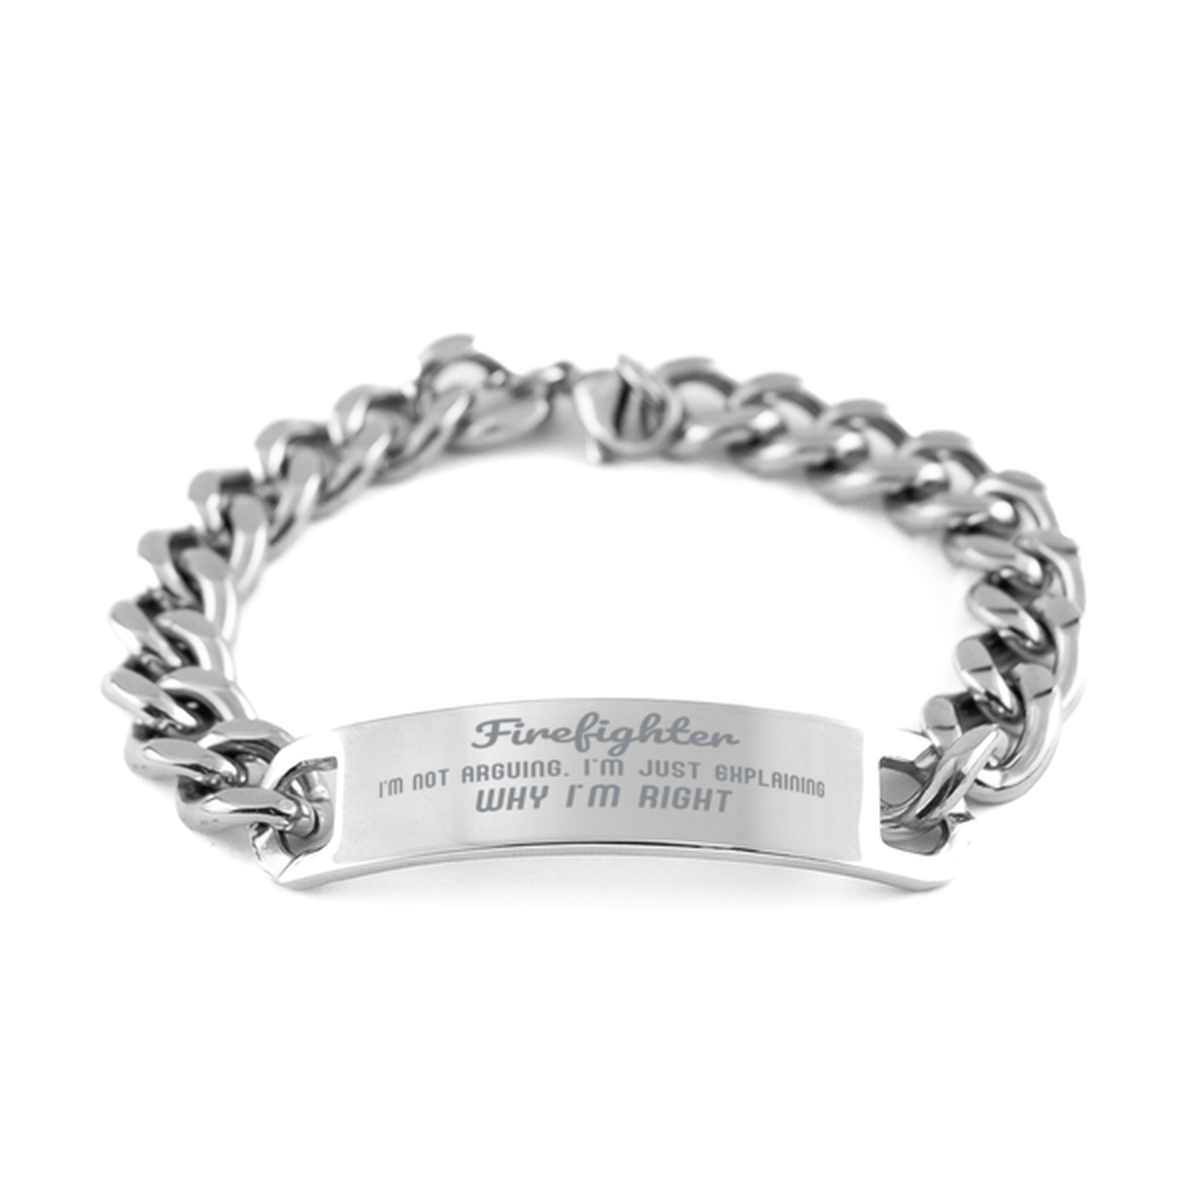 Firefighter I'm not Arguing. I'm Just Explaining Why I'm RIGHT Cuban Chain Stainless Steel Bracelet, Graduation Birthday Christmas Firefighter Gifts For Firefighter Funny Saying Quote Present for Men Women Coworker